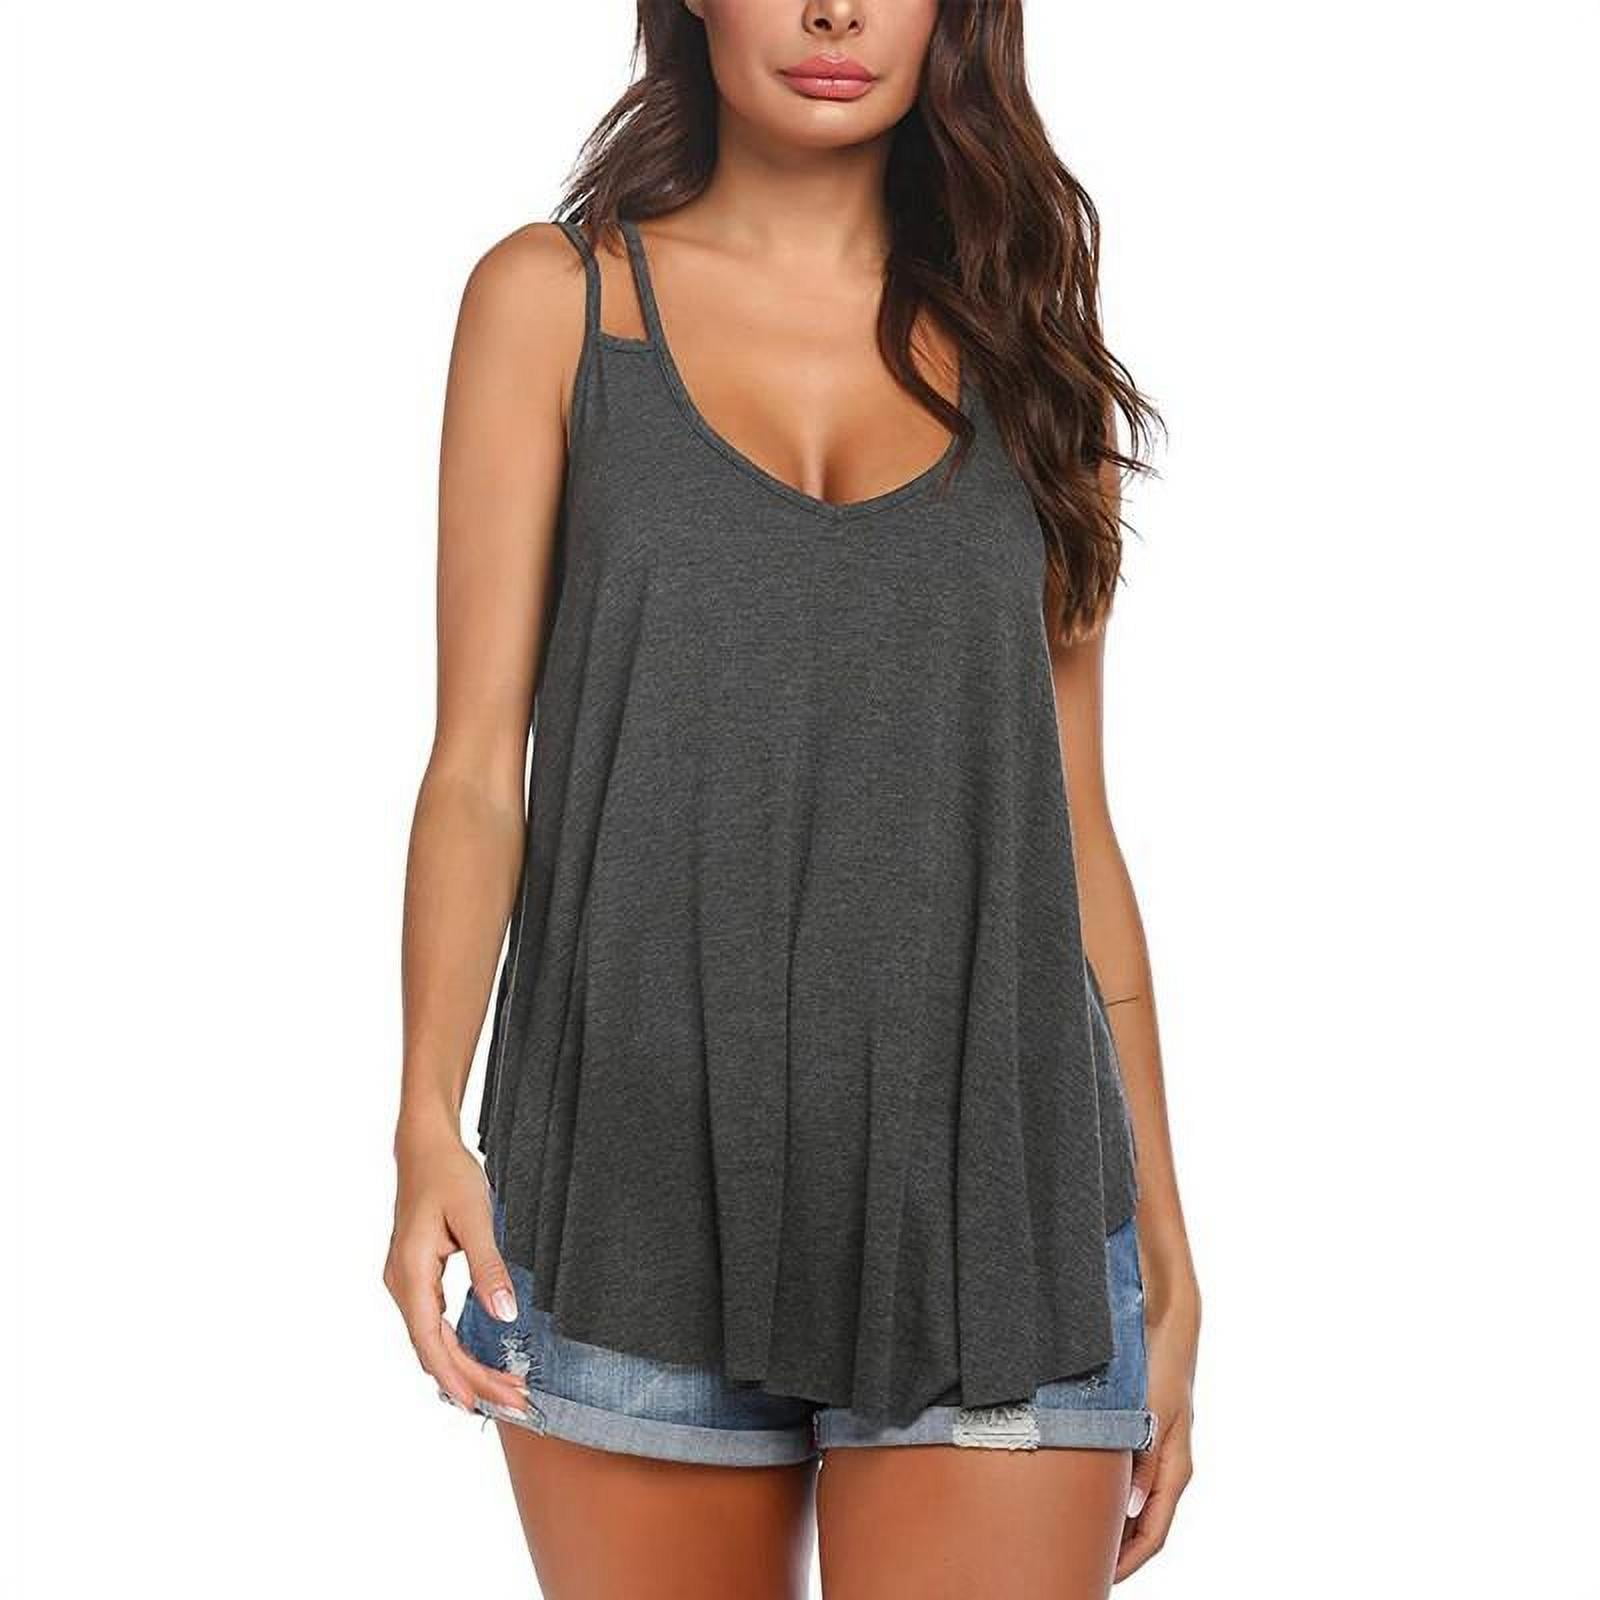 Women's Tops Sleeveless Backless Ruched Scoop Neck Tunic Pleated Flowy Casual Loose Tank Top Blouse 